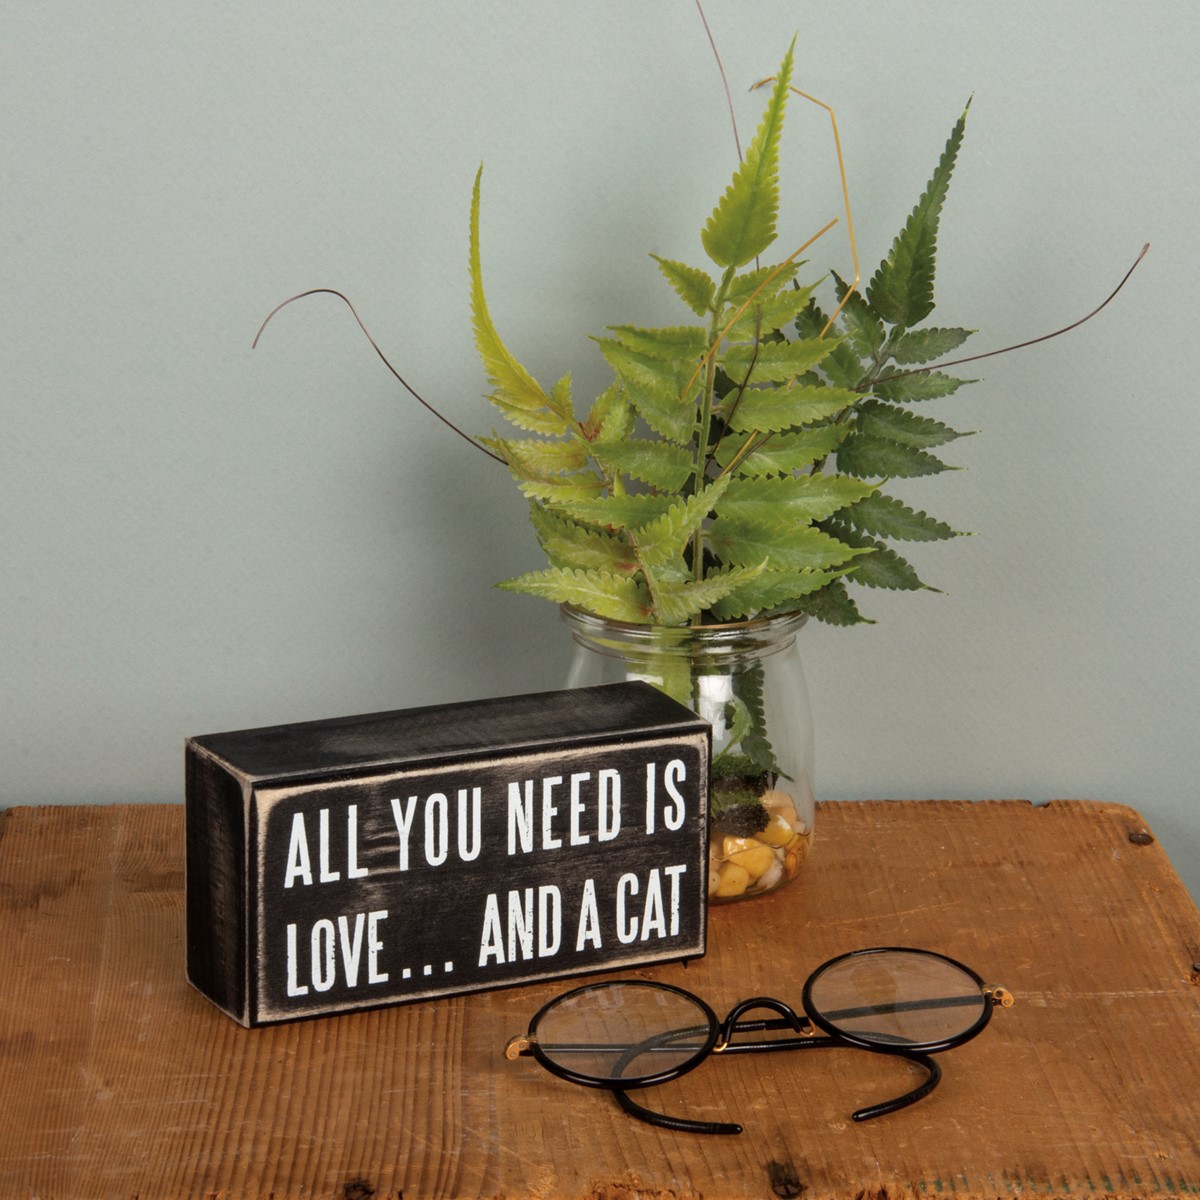 All You Need Is Love And A Cat Box Sign - Wood